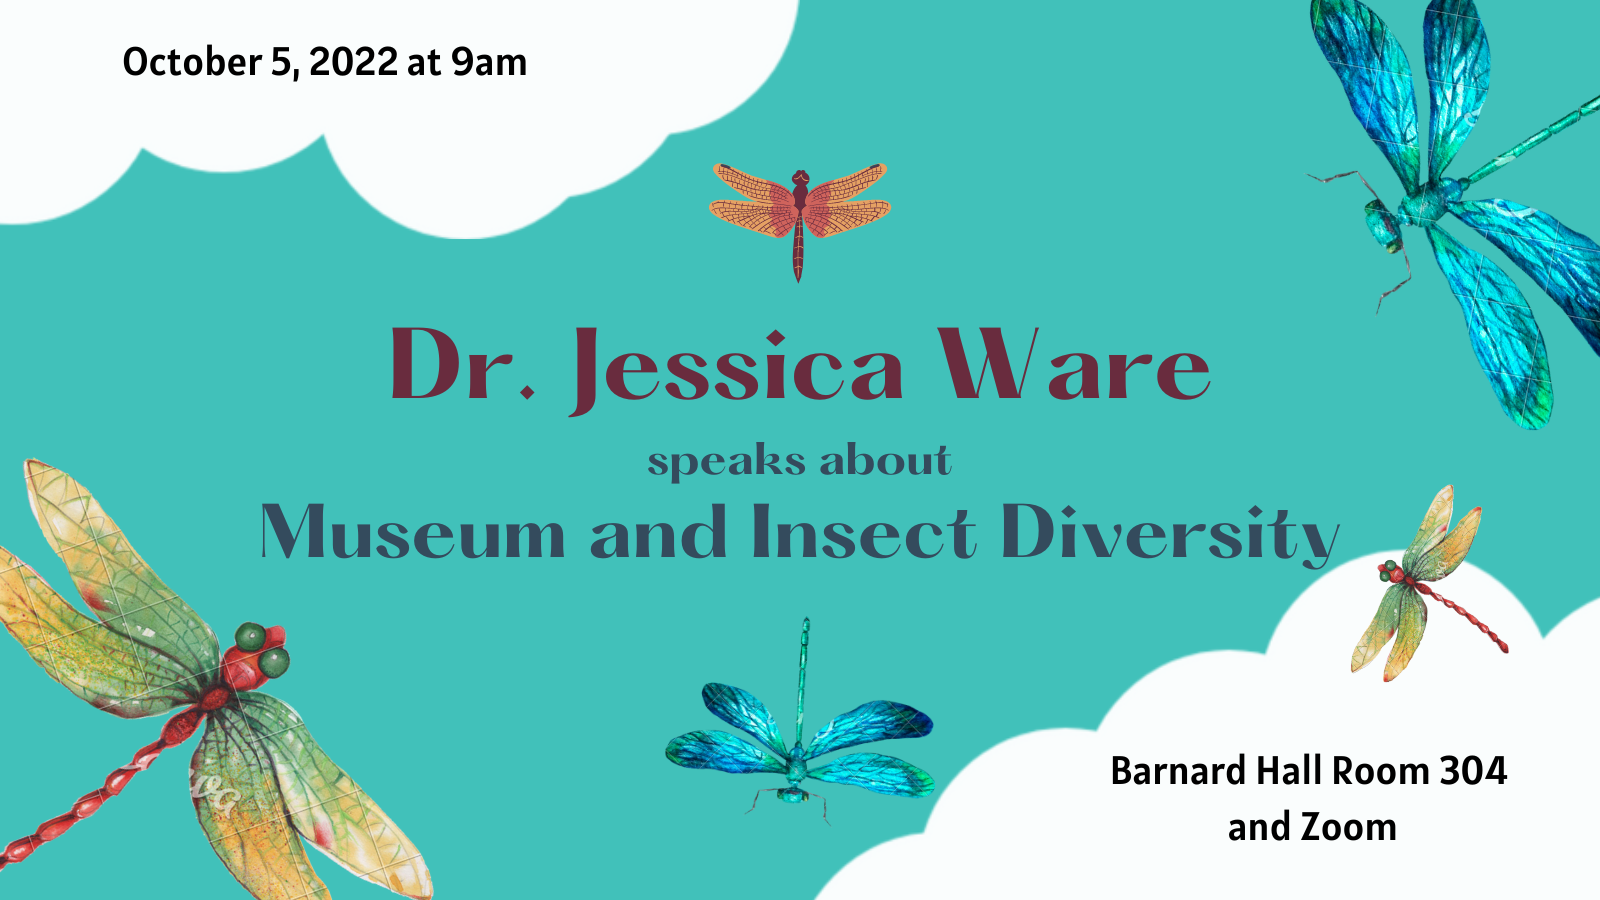 Dr. Jessica Ware, guest speaker, speaks about Museum and Insect Diversity